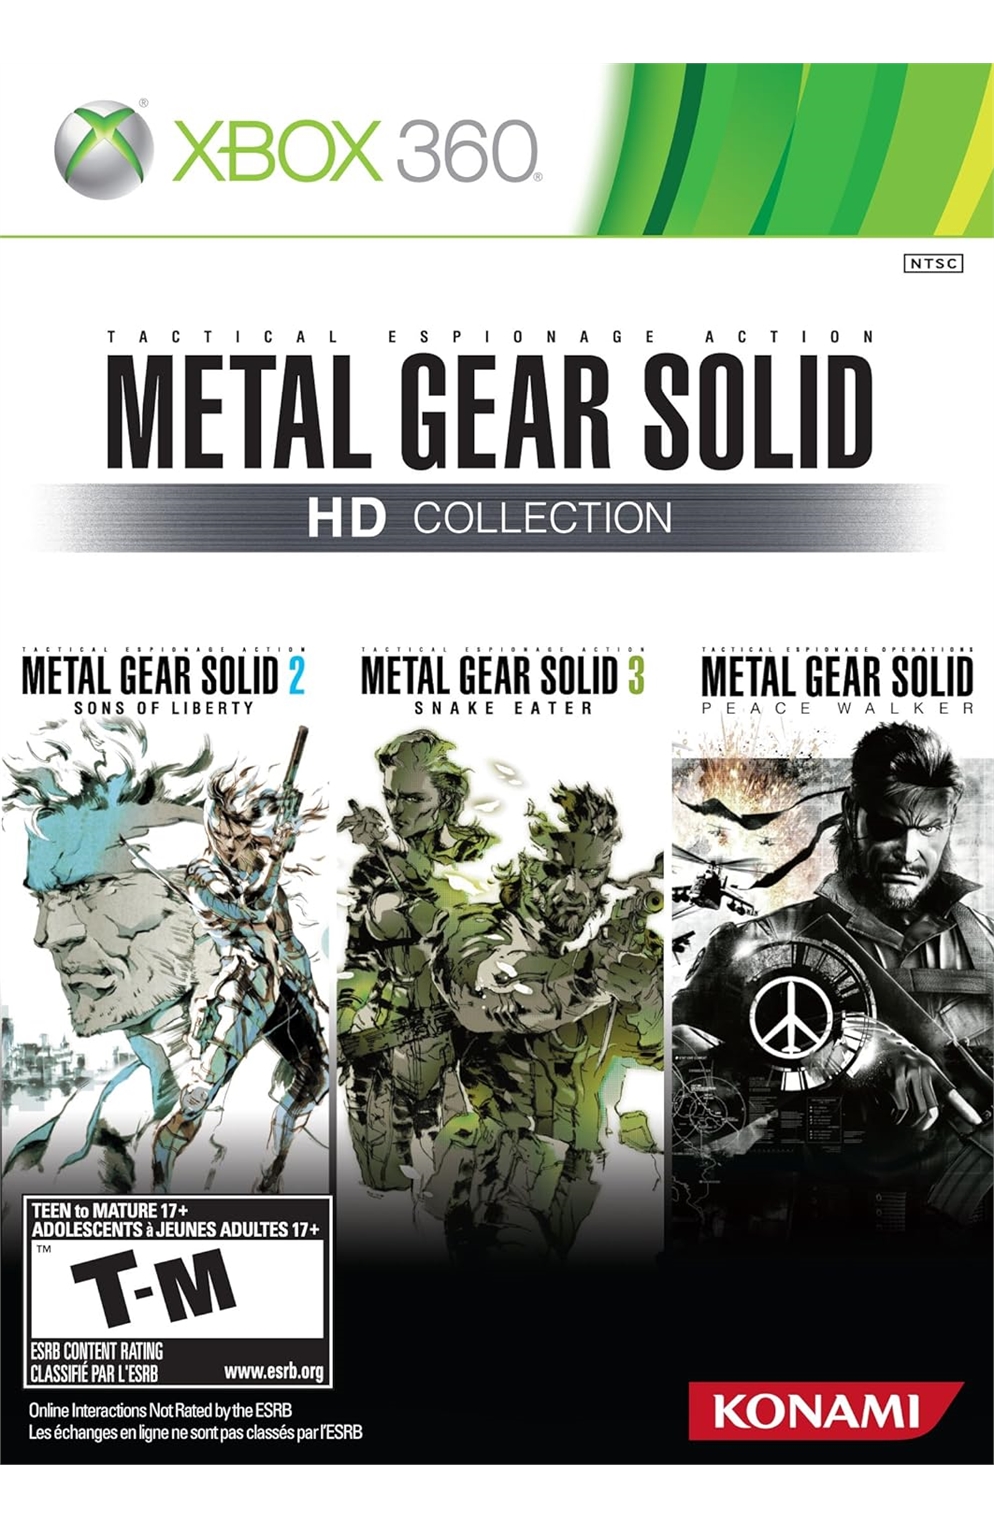 Xbox 360 Xb360 Metal Gear Solid Hd Collection